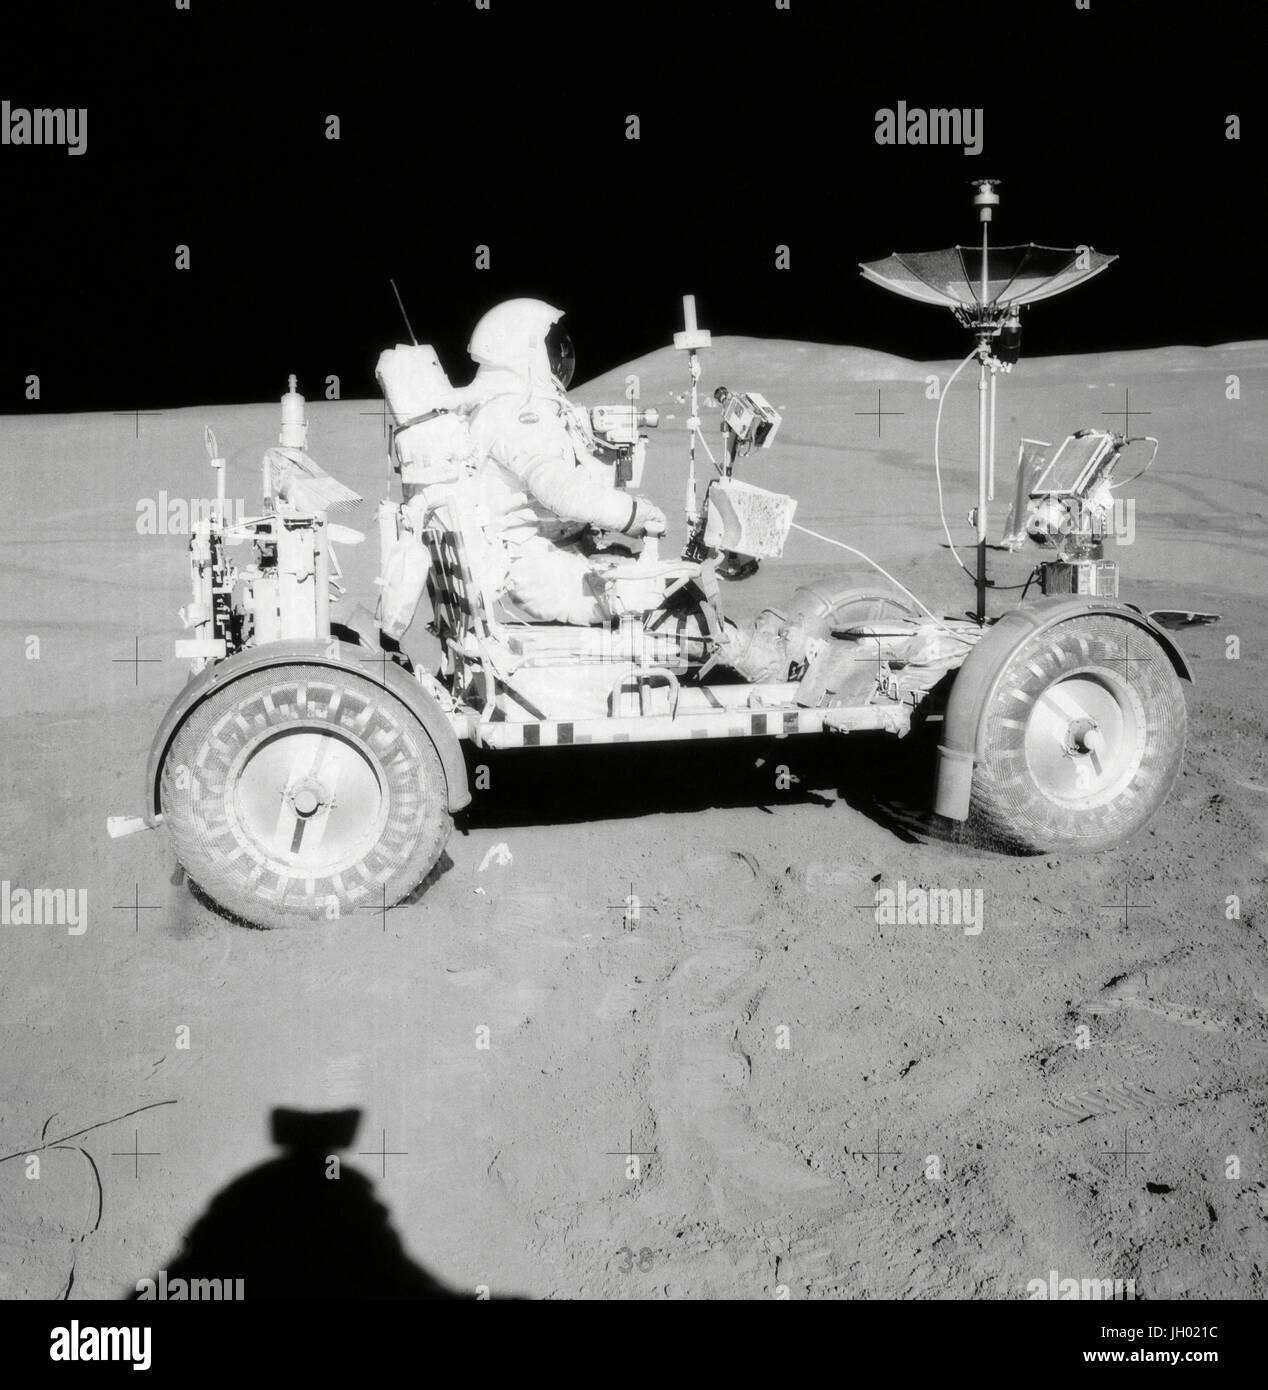 Scott on the Rover. David R. Scott, Apollo 15 Commander, is seated in the Rover, Lunar Roving Vehicle (LRV) during the first lunar surface extravehicular activity (EVA-1) at the Hadley-Apennine landing site. Photographer: NASA James B. Irwin Stock Photo